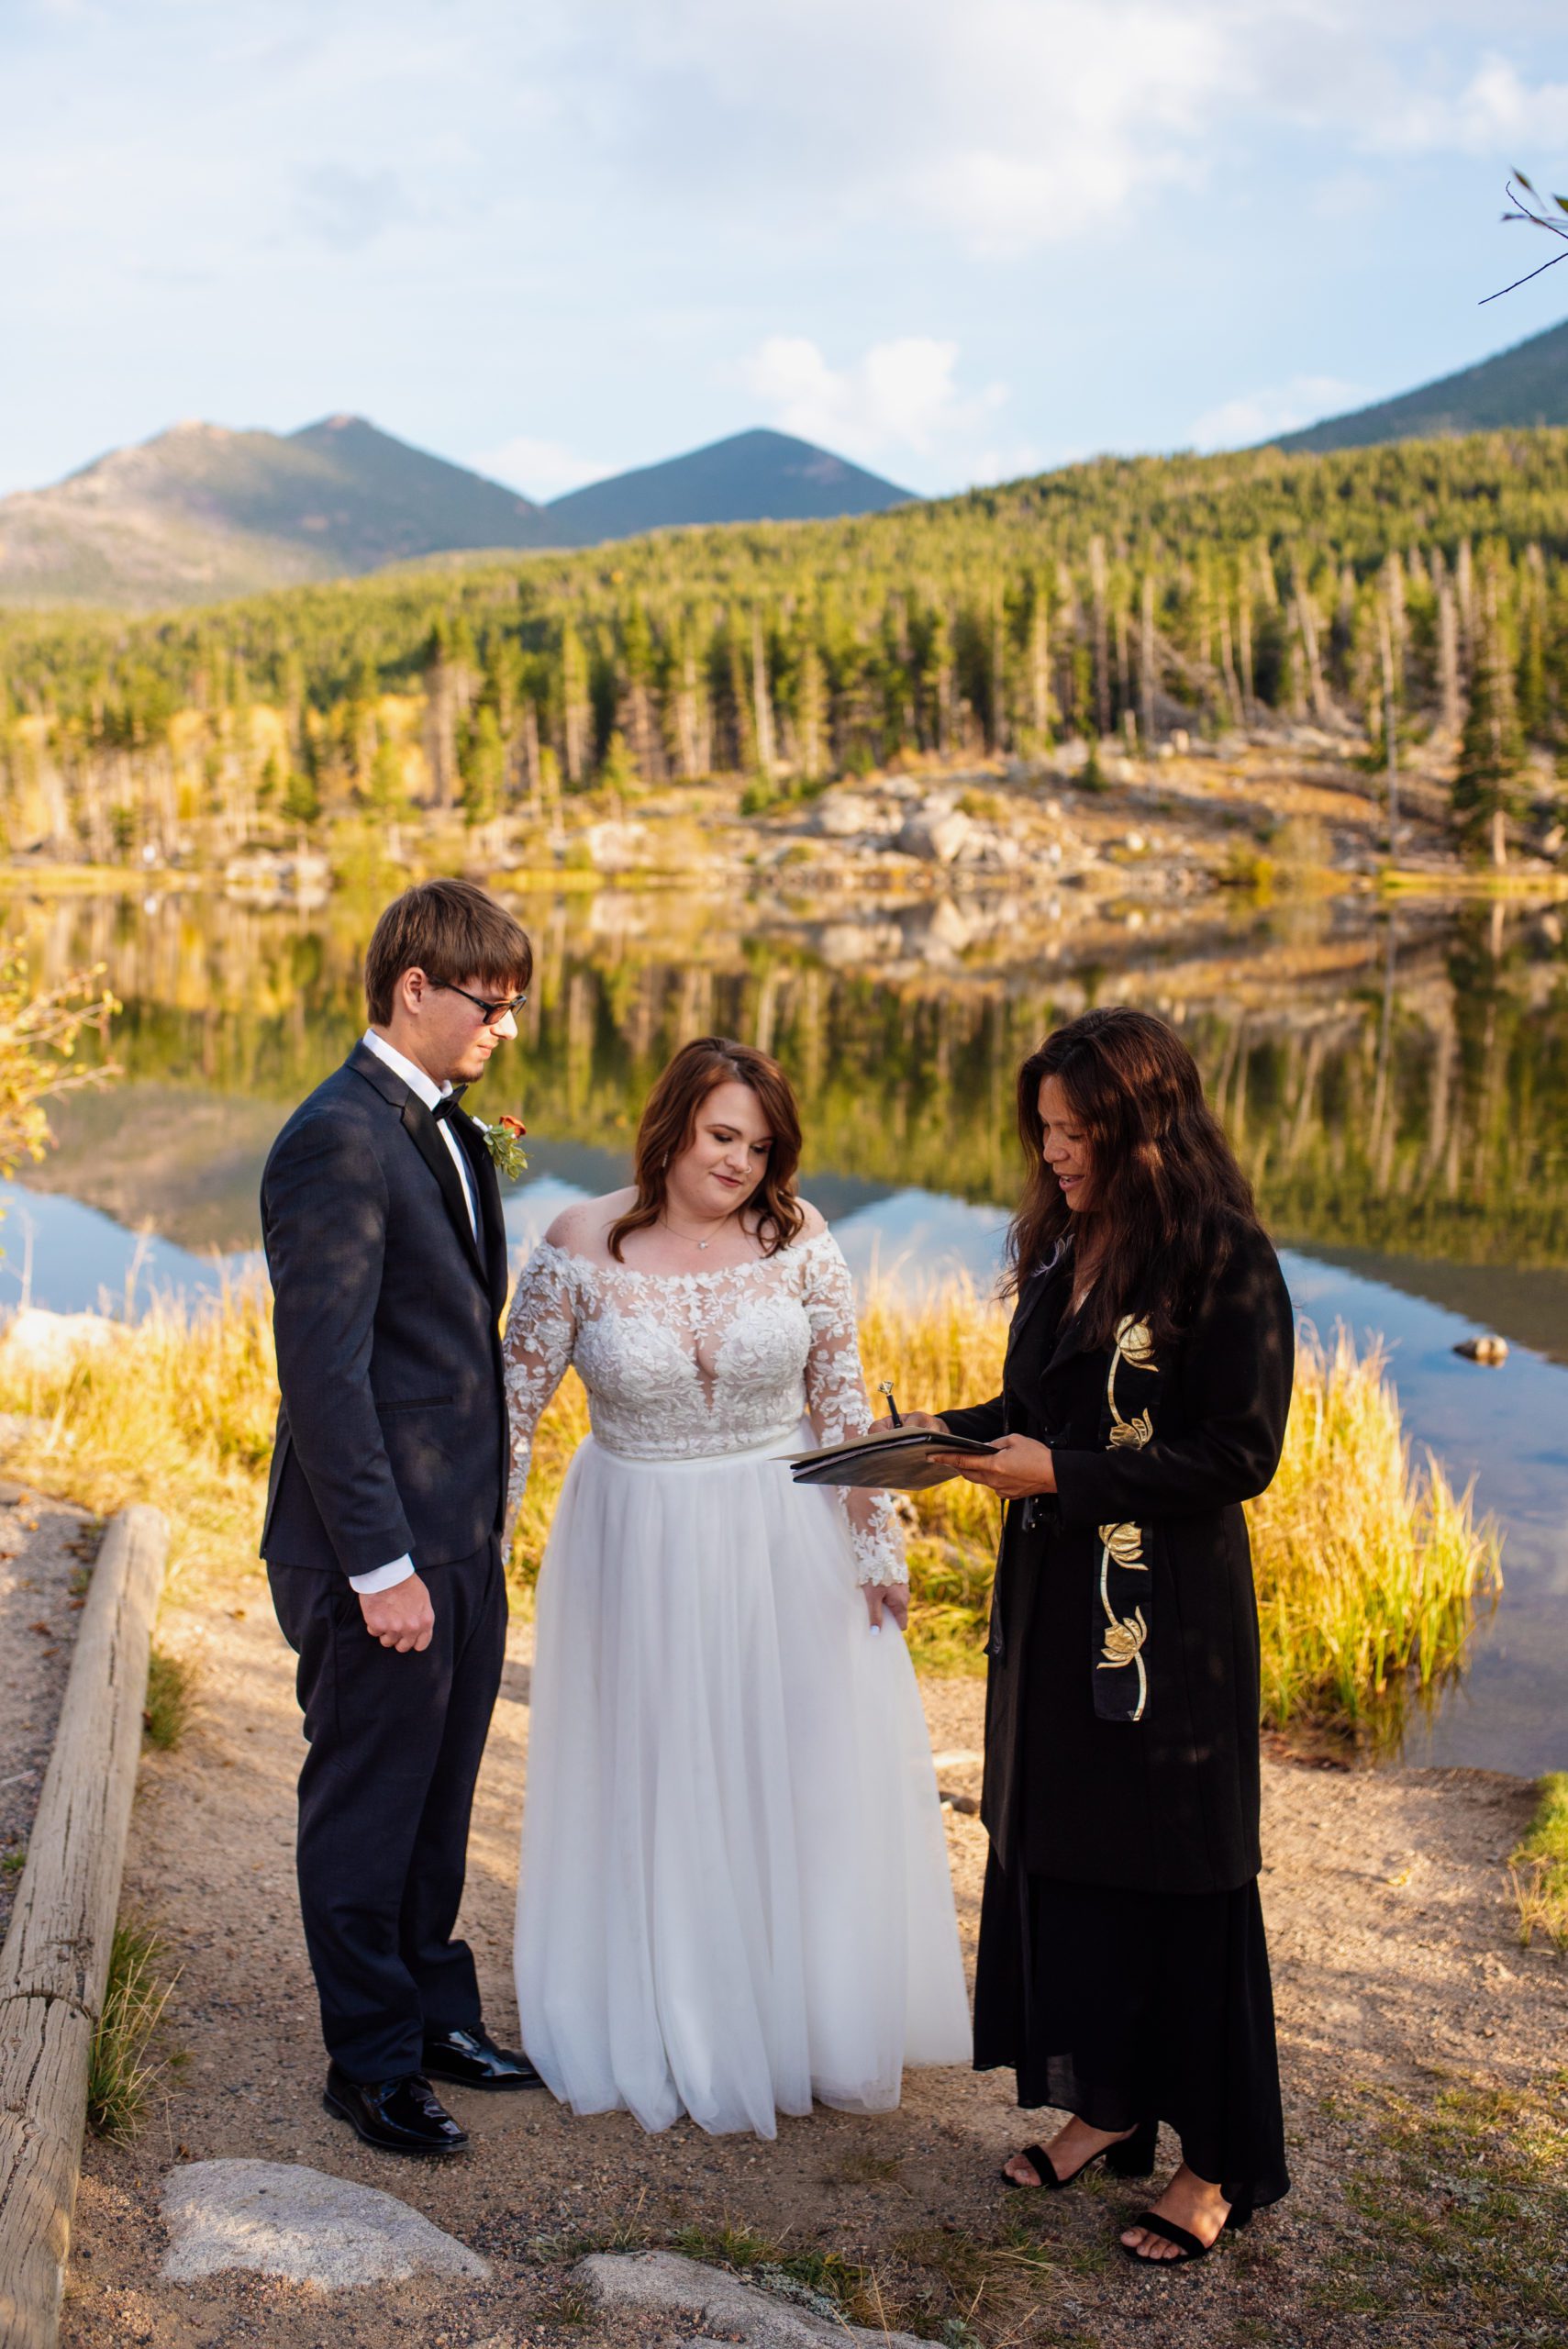 Officiant shows bride and groom marriage license at Sprague Lake - RMNP